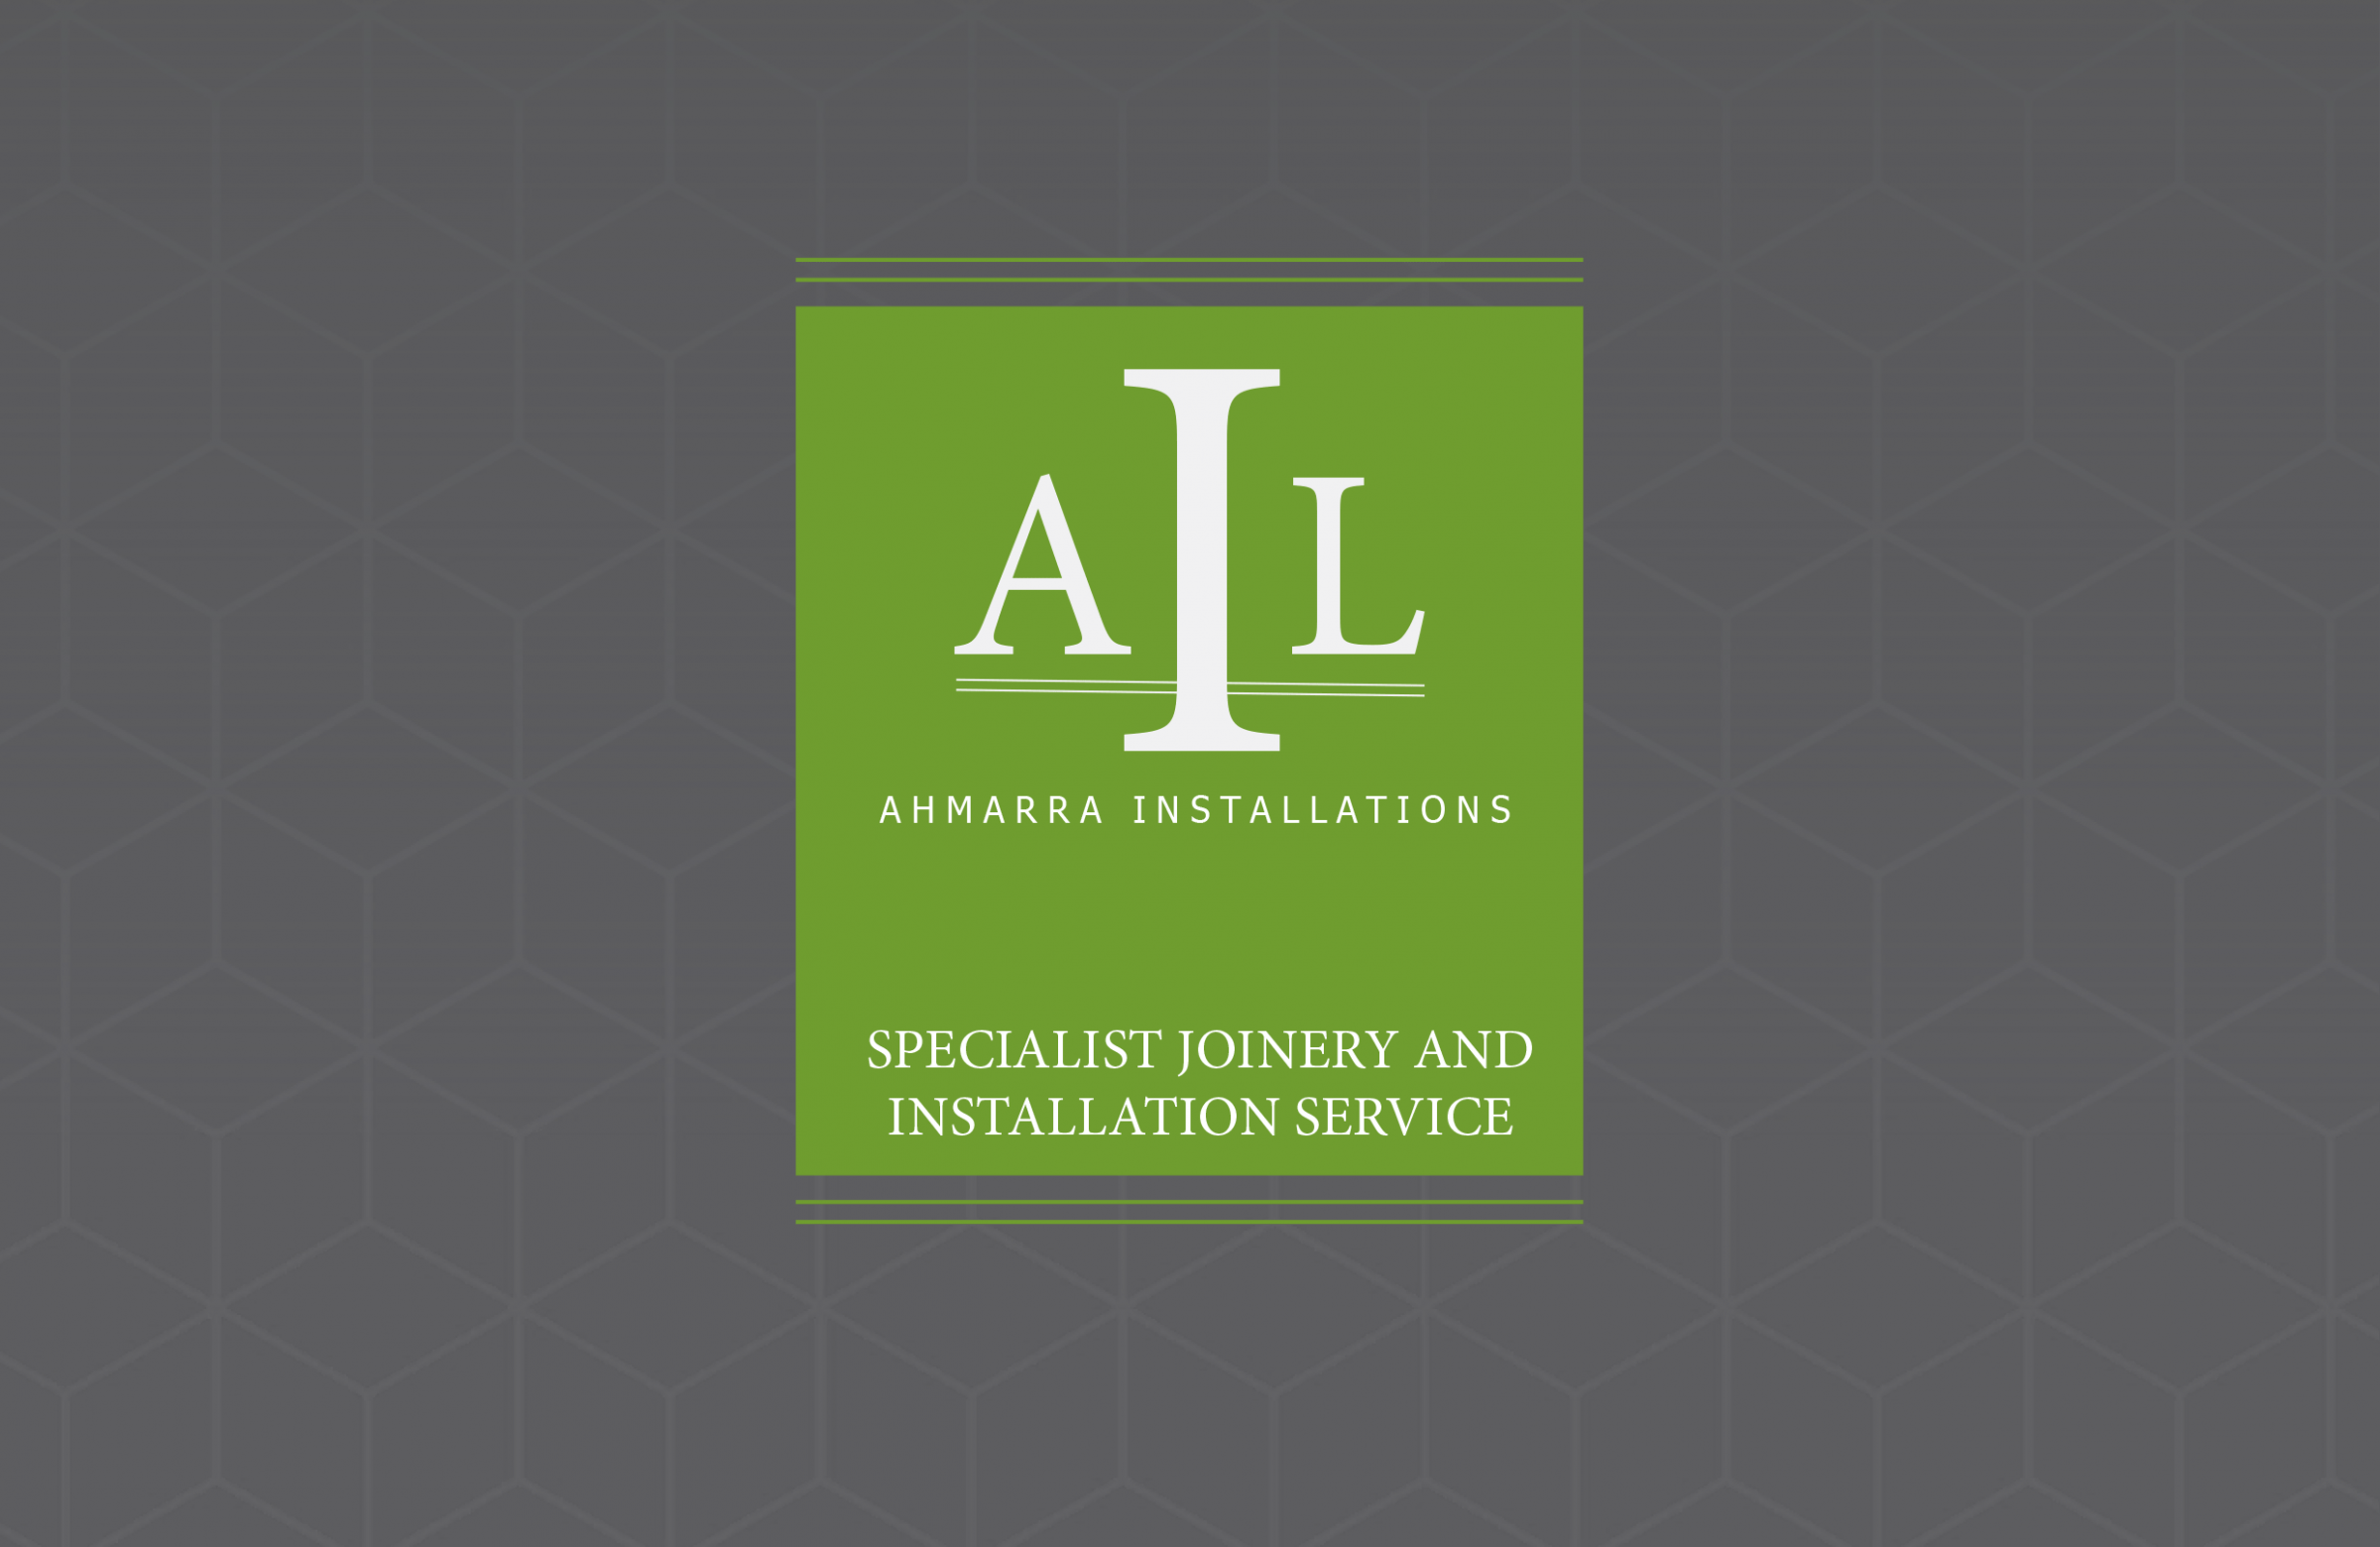 NEW WEBSITE AND BROCHURE FOR SPECIALIST JOINERY AND INSTALLATION FROM AHMARRA